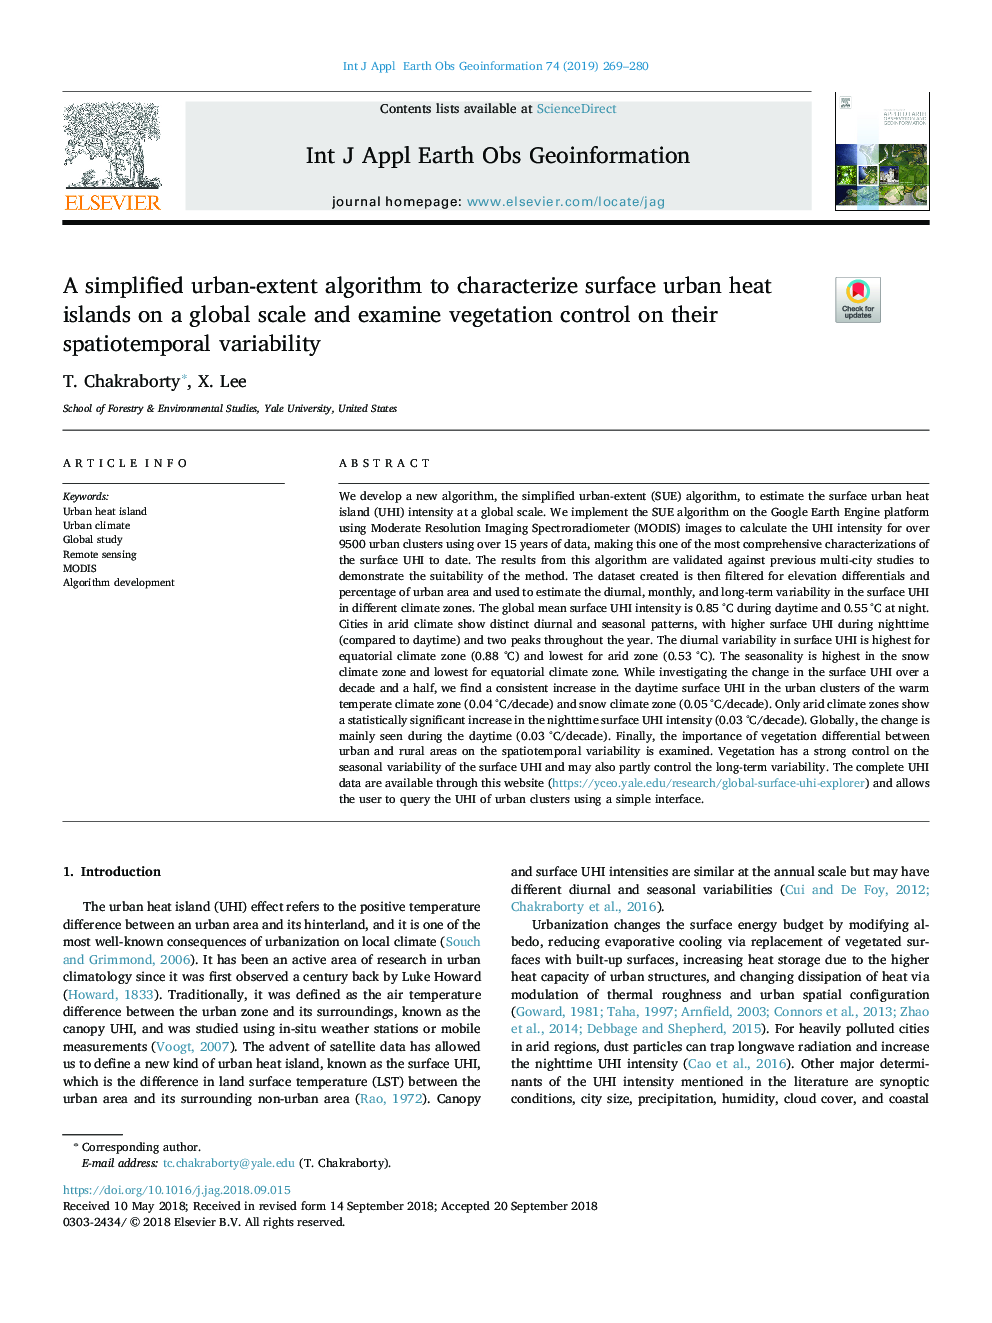 A simplified urban-extent algorithm to characterize surface urban heat islands on a global scale and examine vegetation control on their spatiotemporal variability